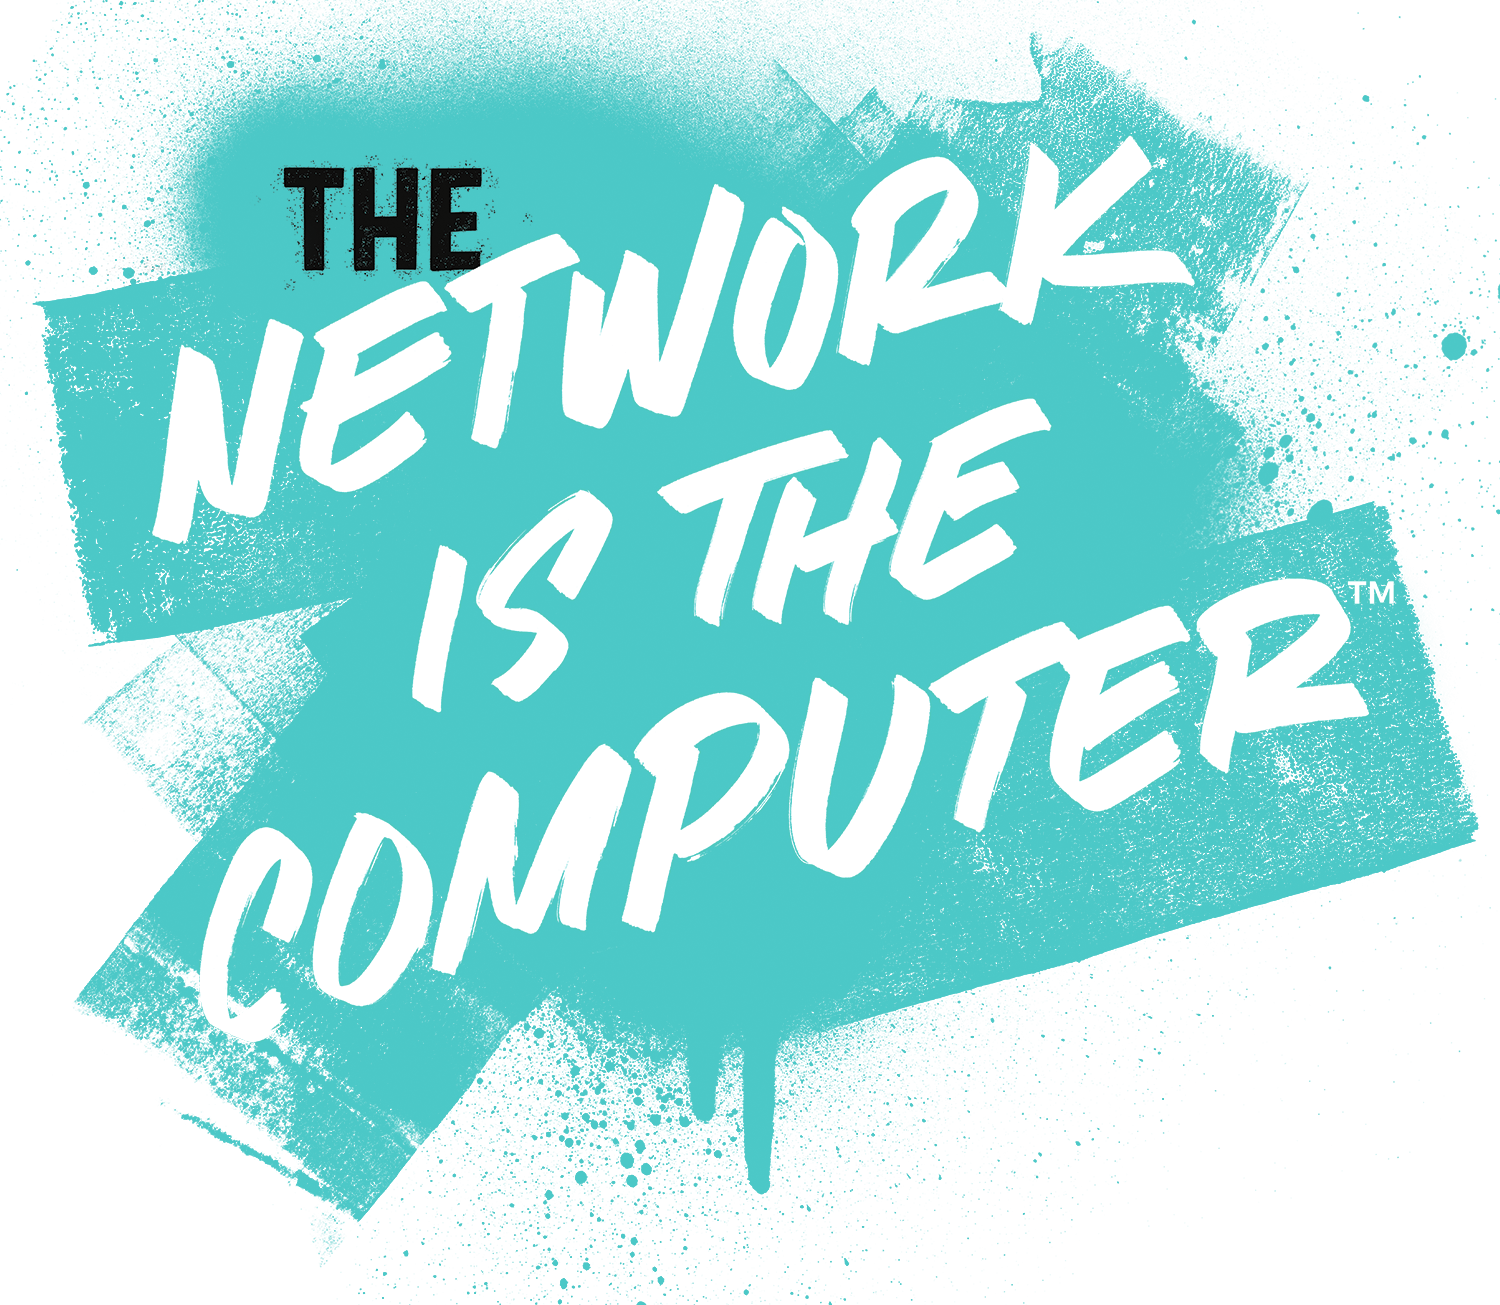 The Network is the Computer